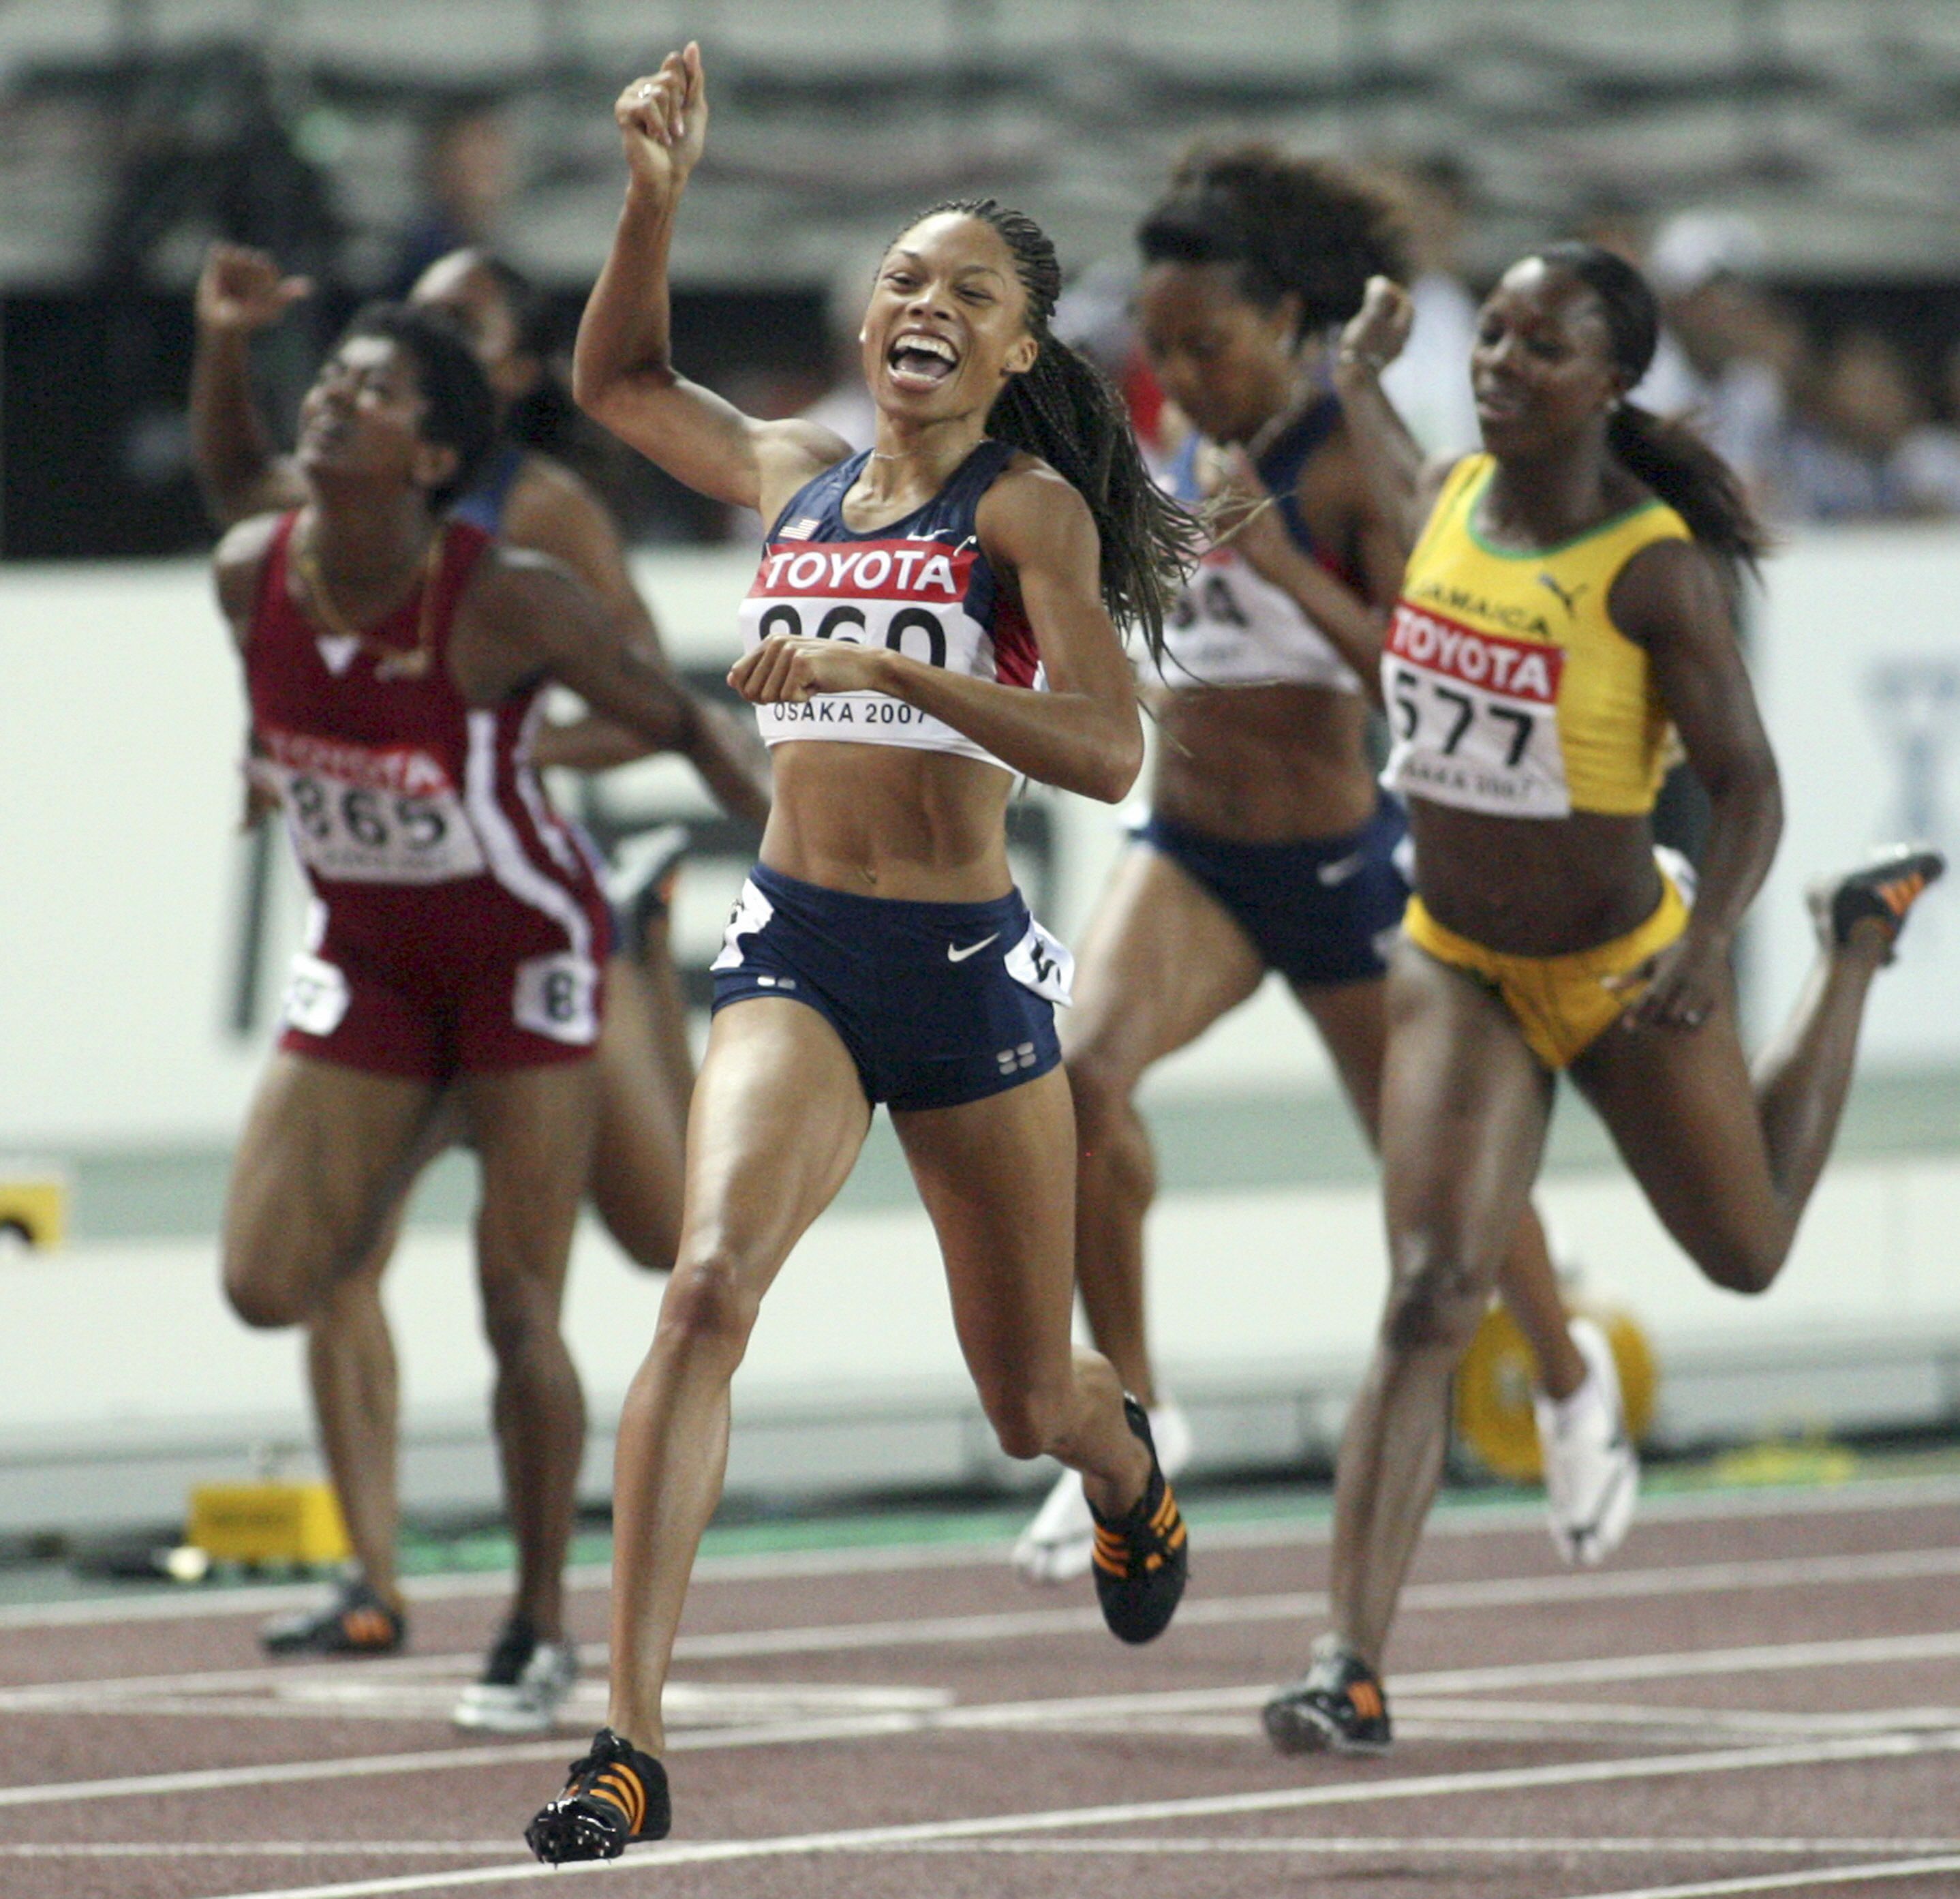 Allyson Felix celebrates her 200m win at the 2007 World Championships in Osaka